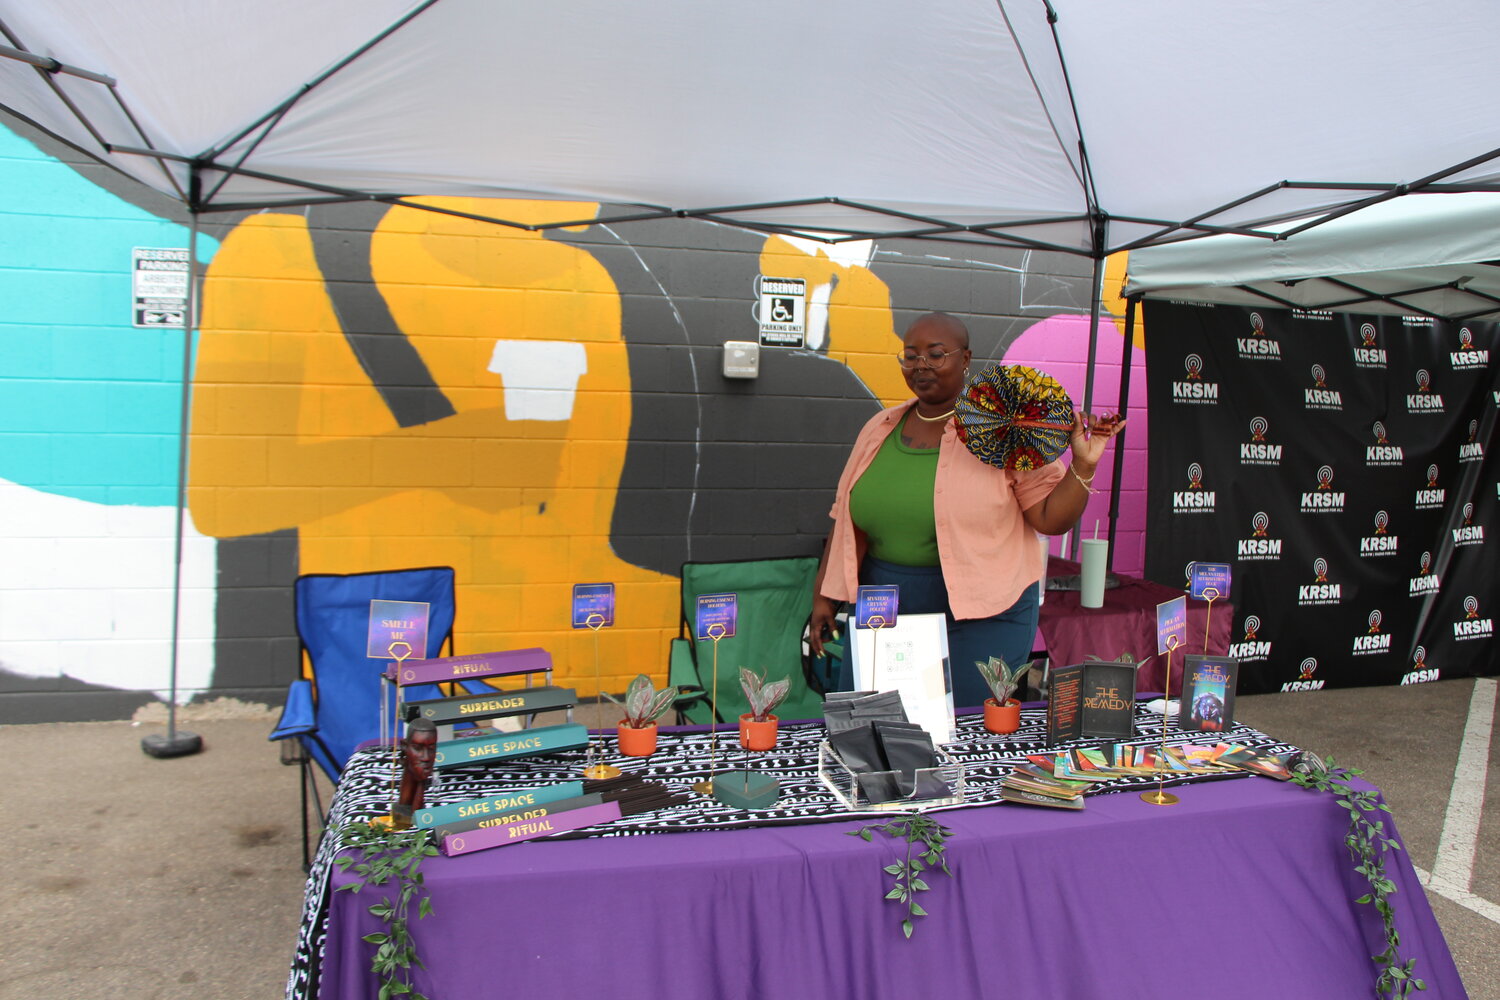 On Monday June 19, a vendor sells spiritual wellness products at the Soul of the Southside festival.